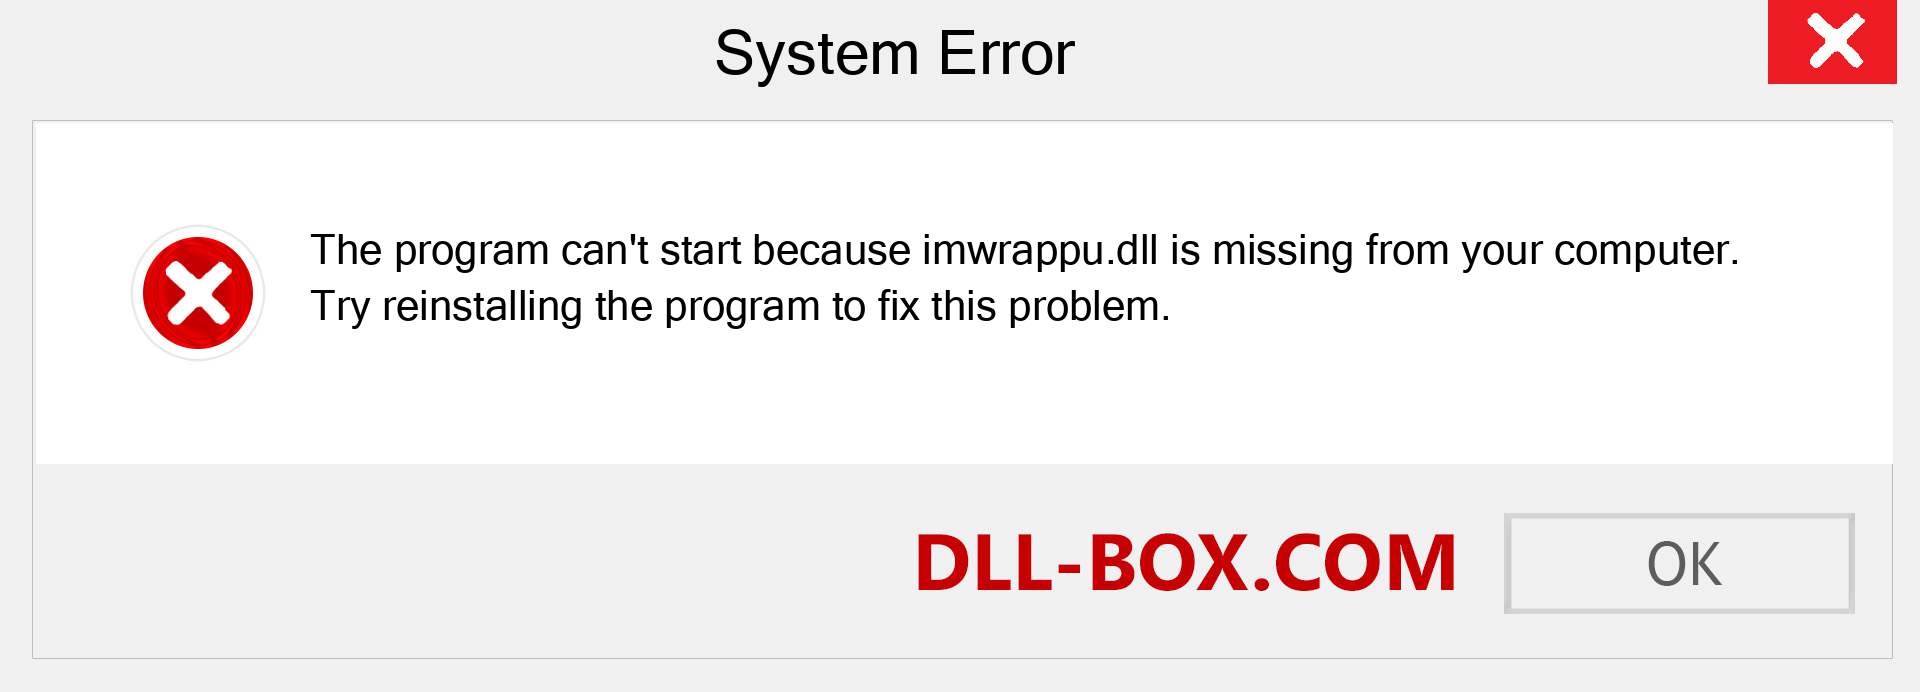  imwrappu.dll file is missing?. Download for Windows 7, 8, 10 - Fix  imwrappu dll Missing Error on Windows, photos, images